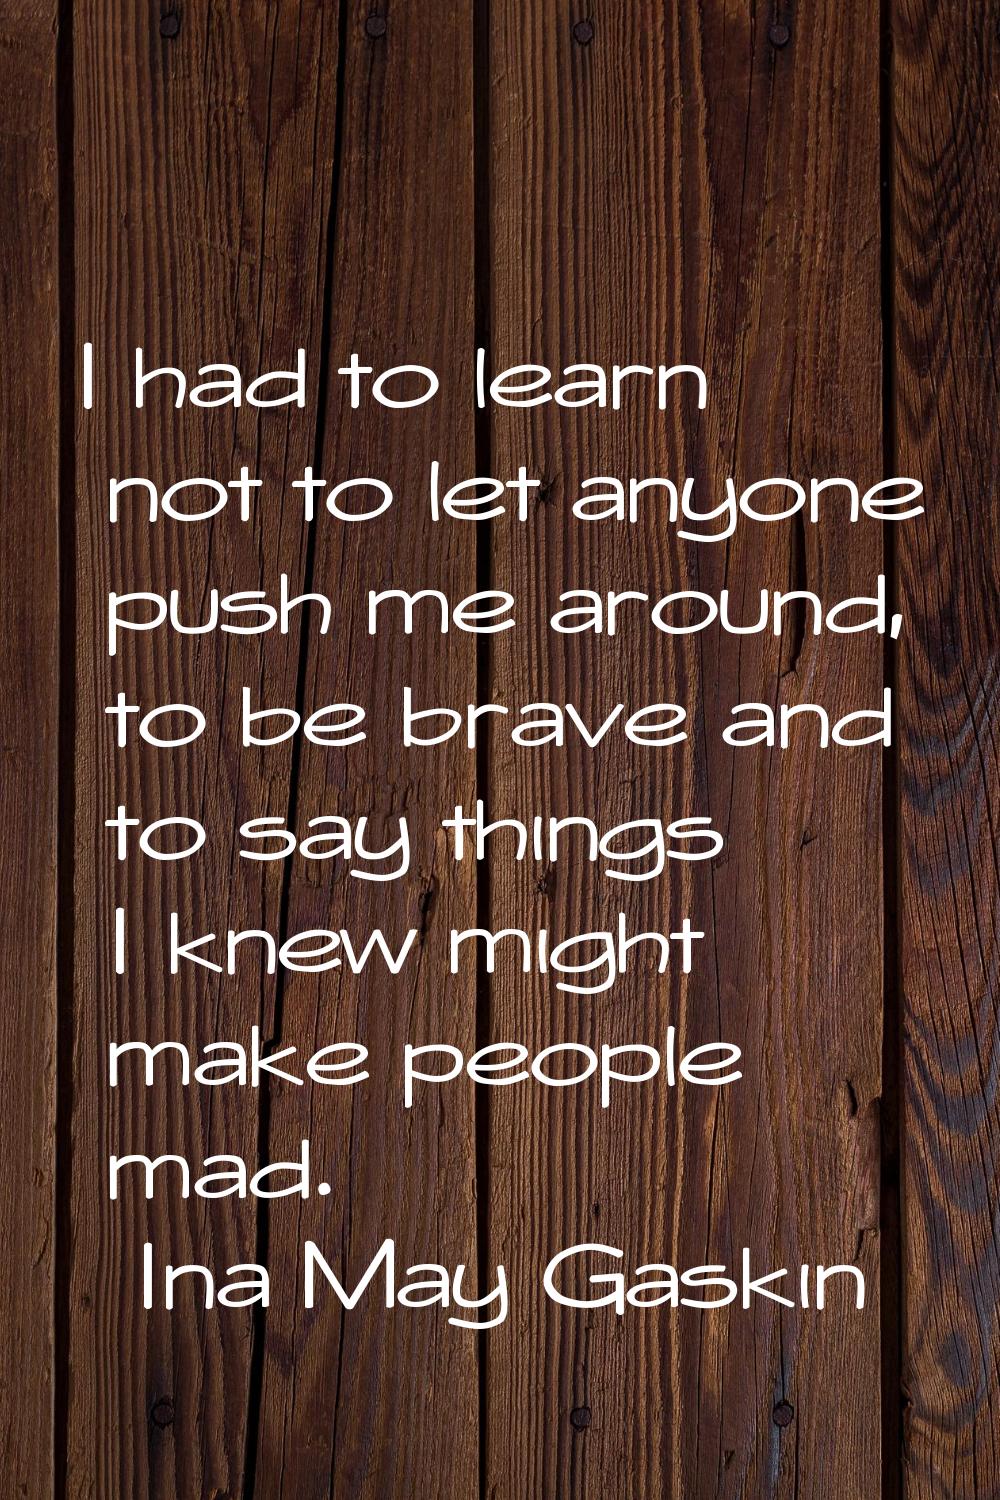 I had to learn not to let anyone push me around, to be brave and to say things I knew might make pe